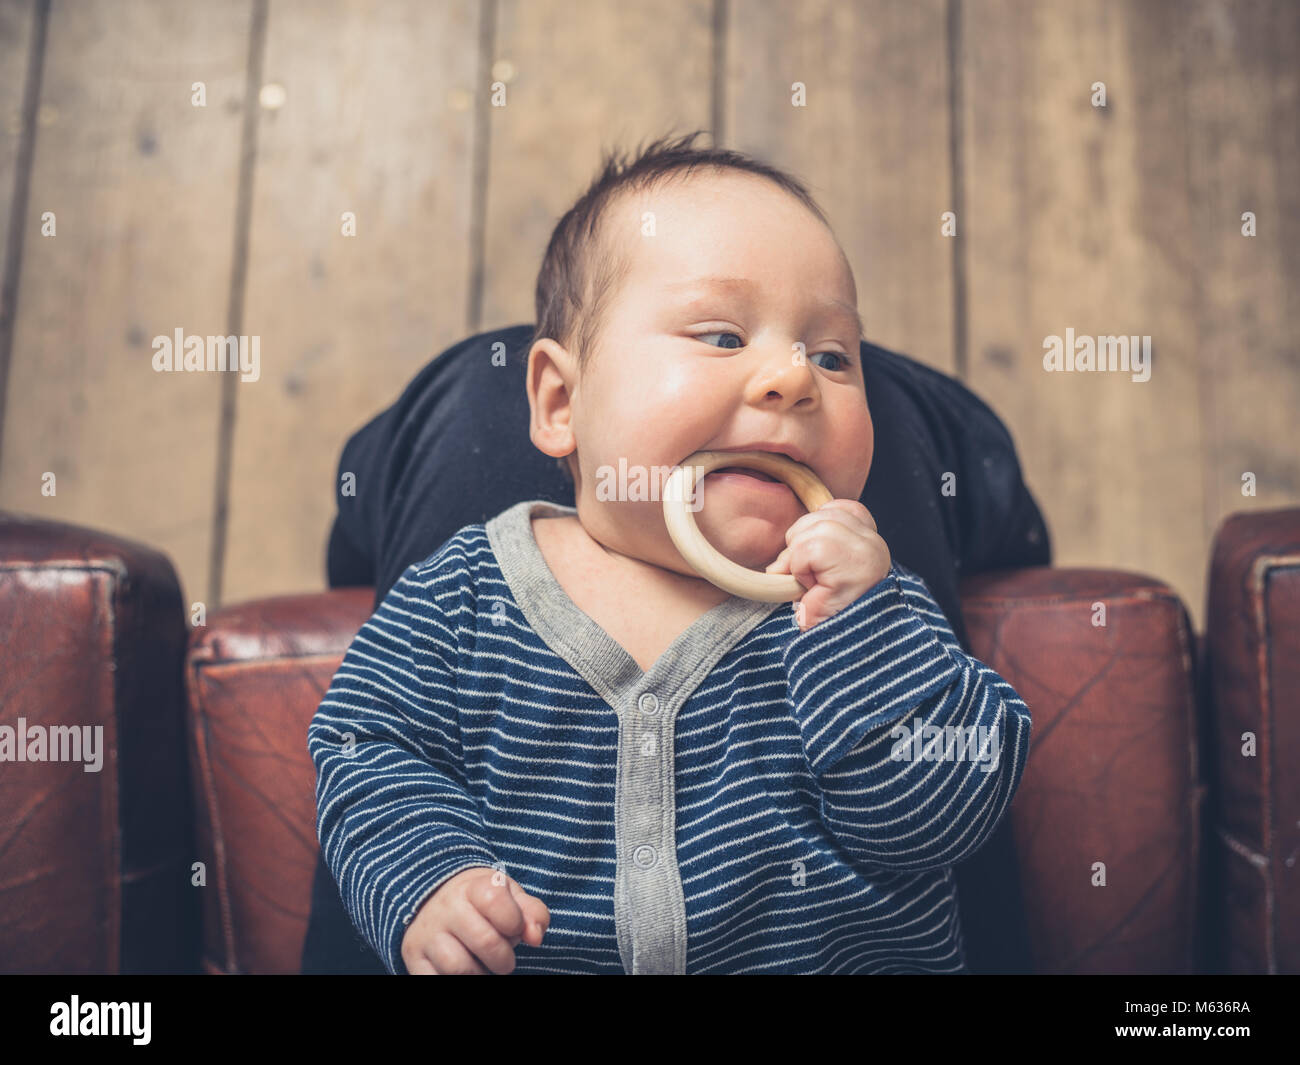 A little baby is chewing on a teething ring Stock Photo